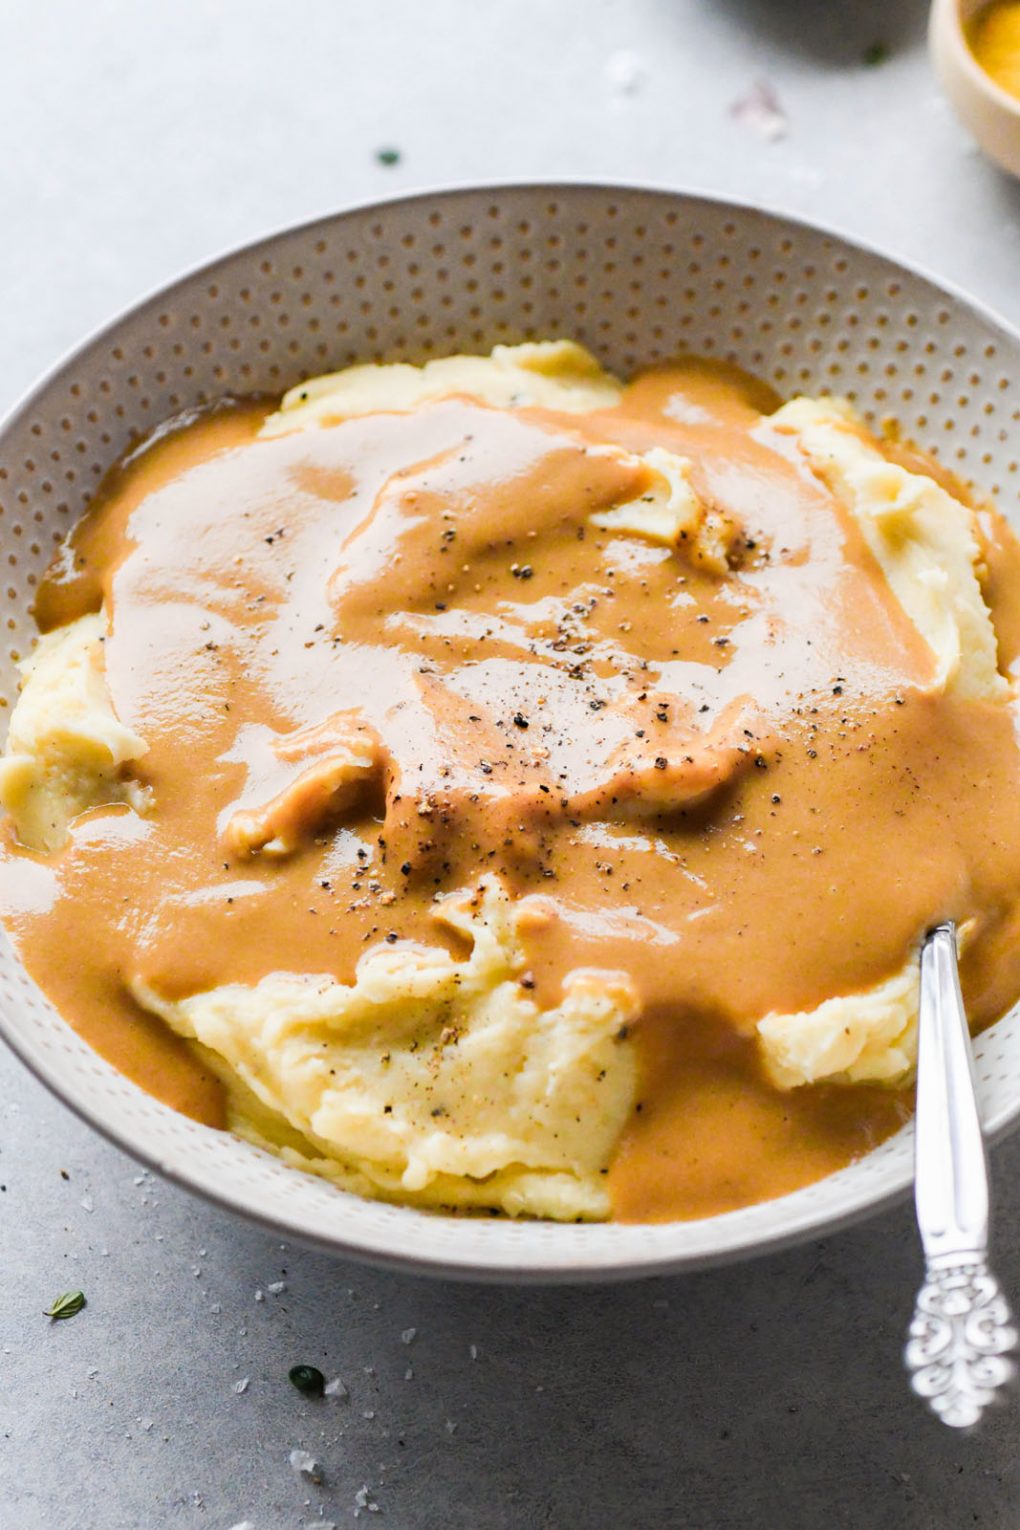 45 degree angle shot of super easy gluten free gravy draped over mashed potatoes, and topped with some cracked black pepper, with a spoon tucked into the mashed potatoes. On a light grey background. 